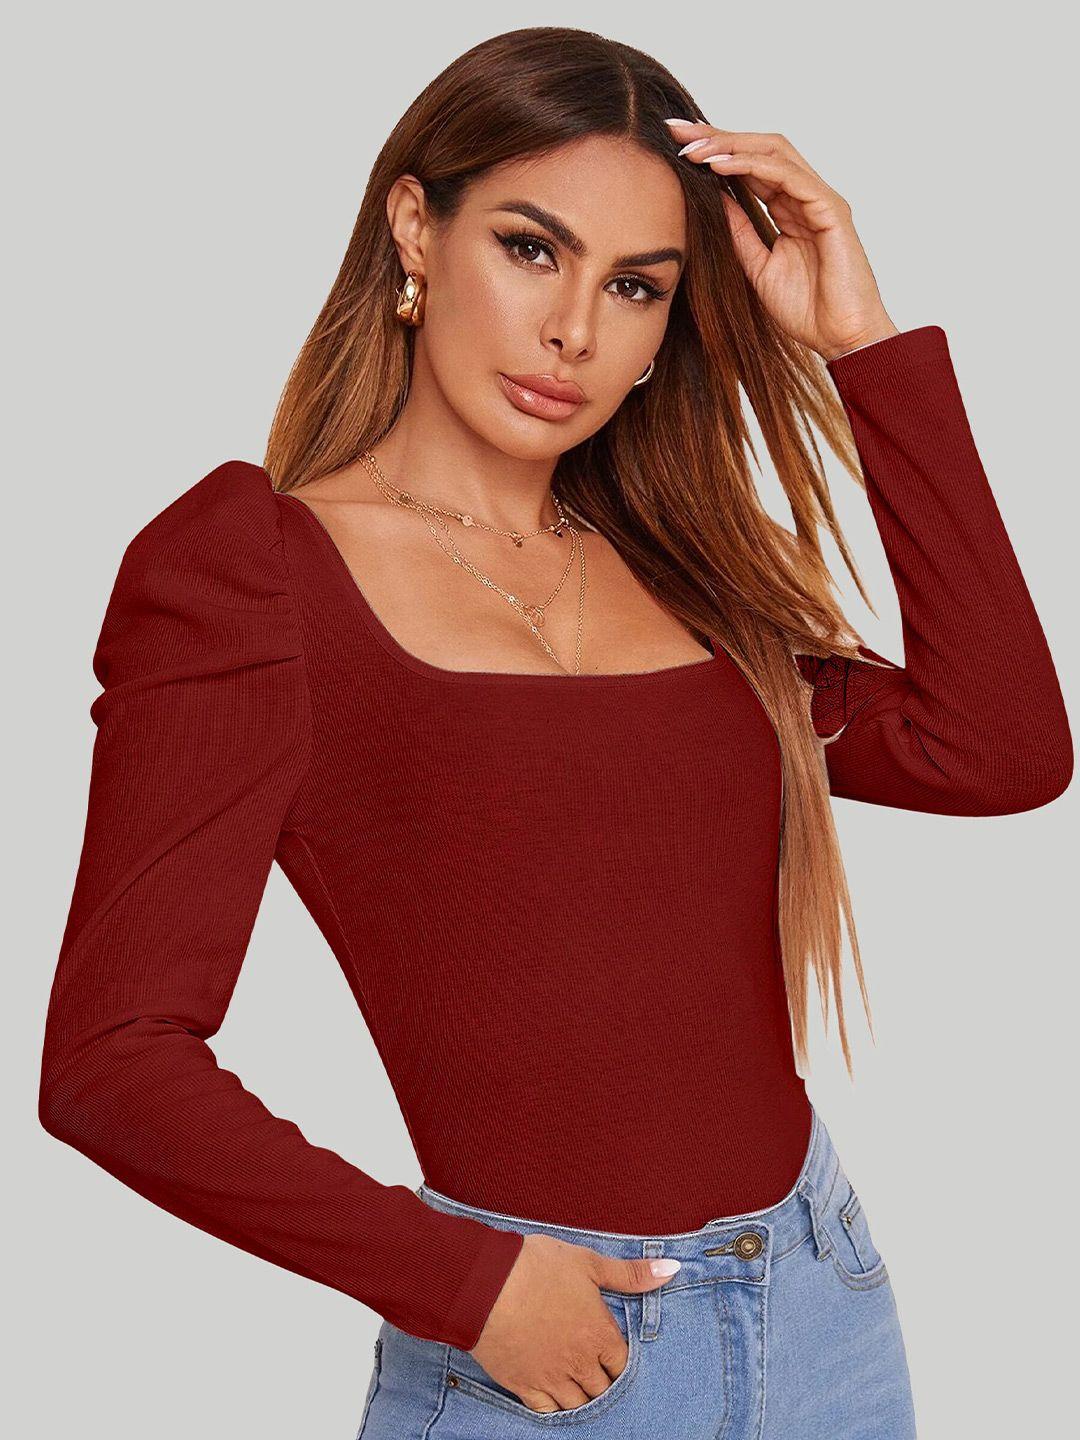 lee tex square neck puffed sleeves top